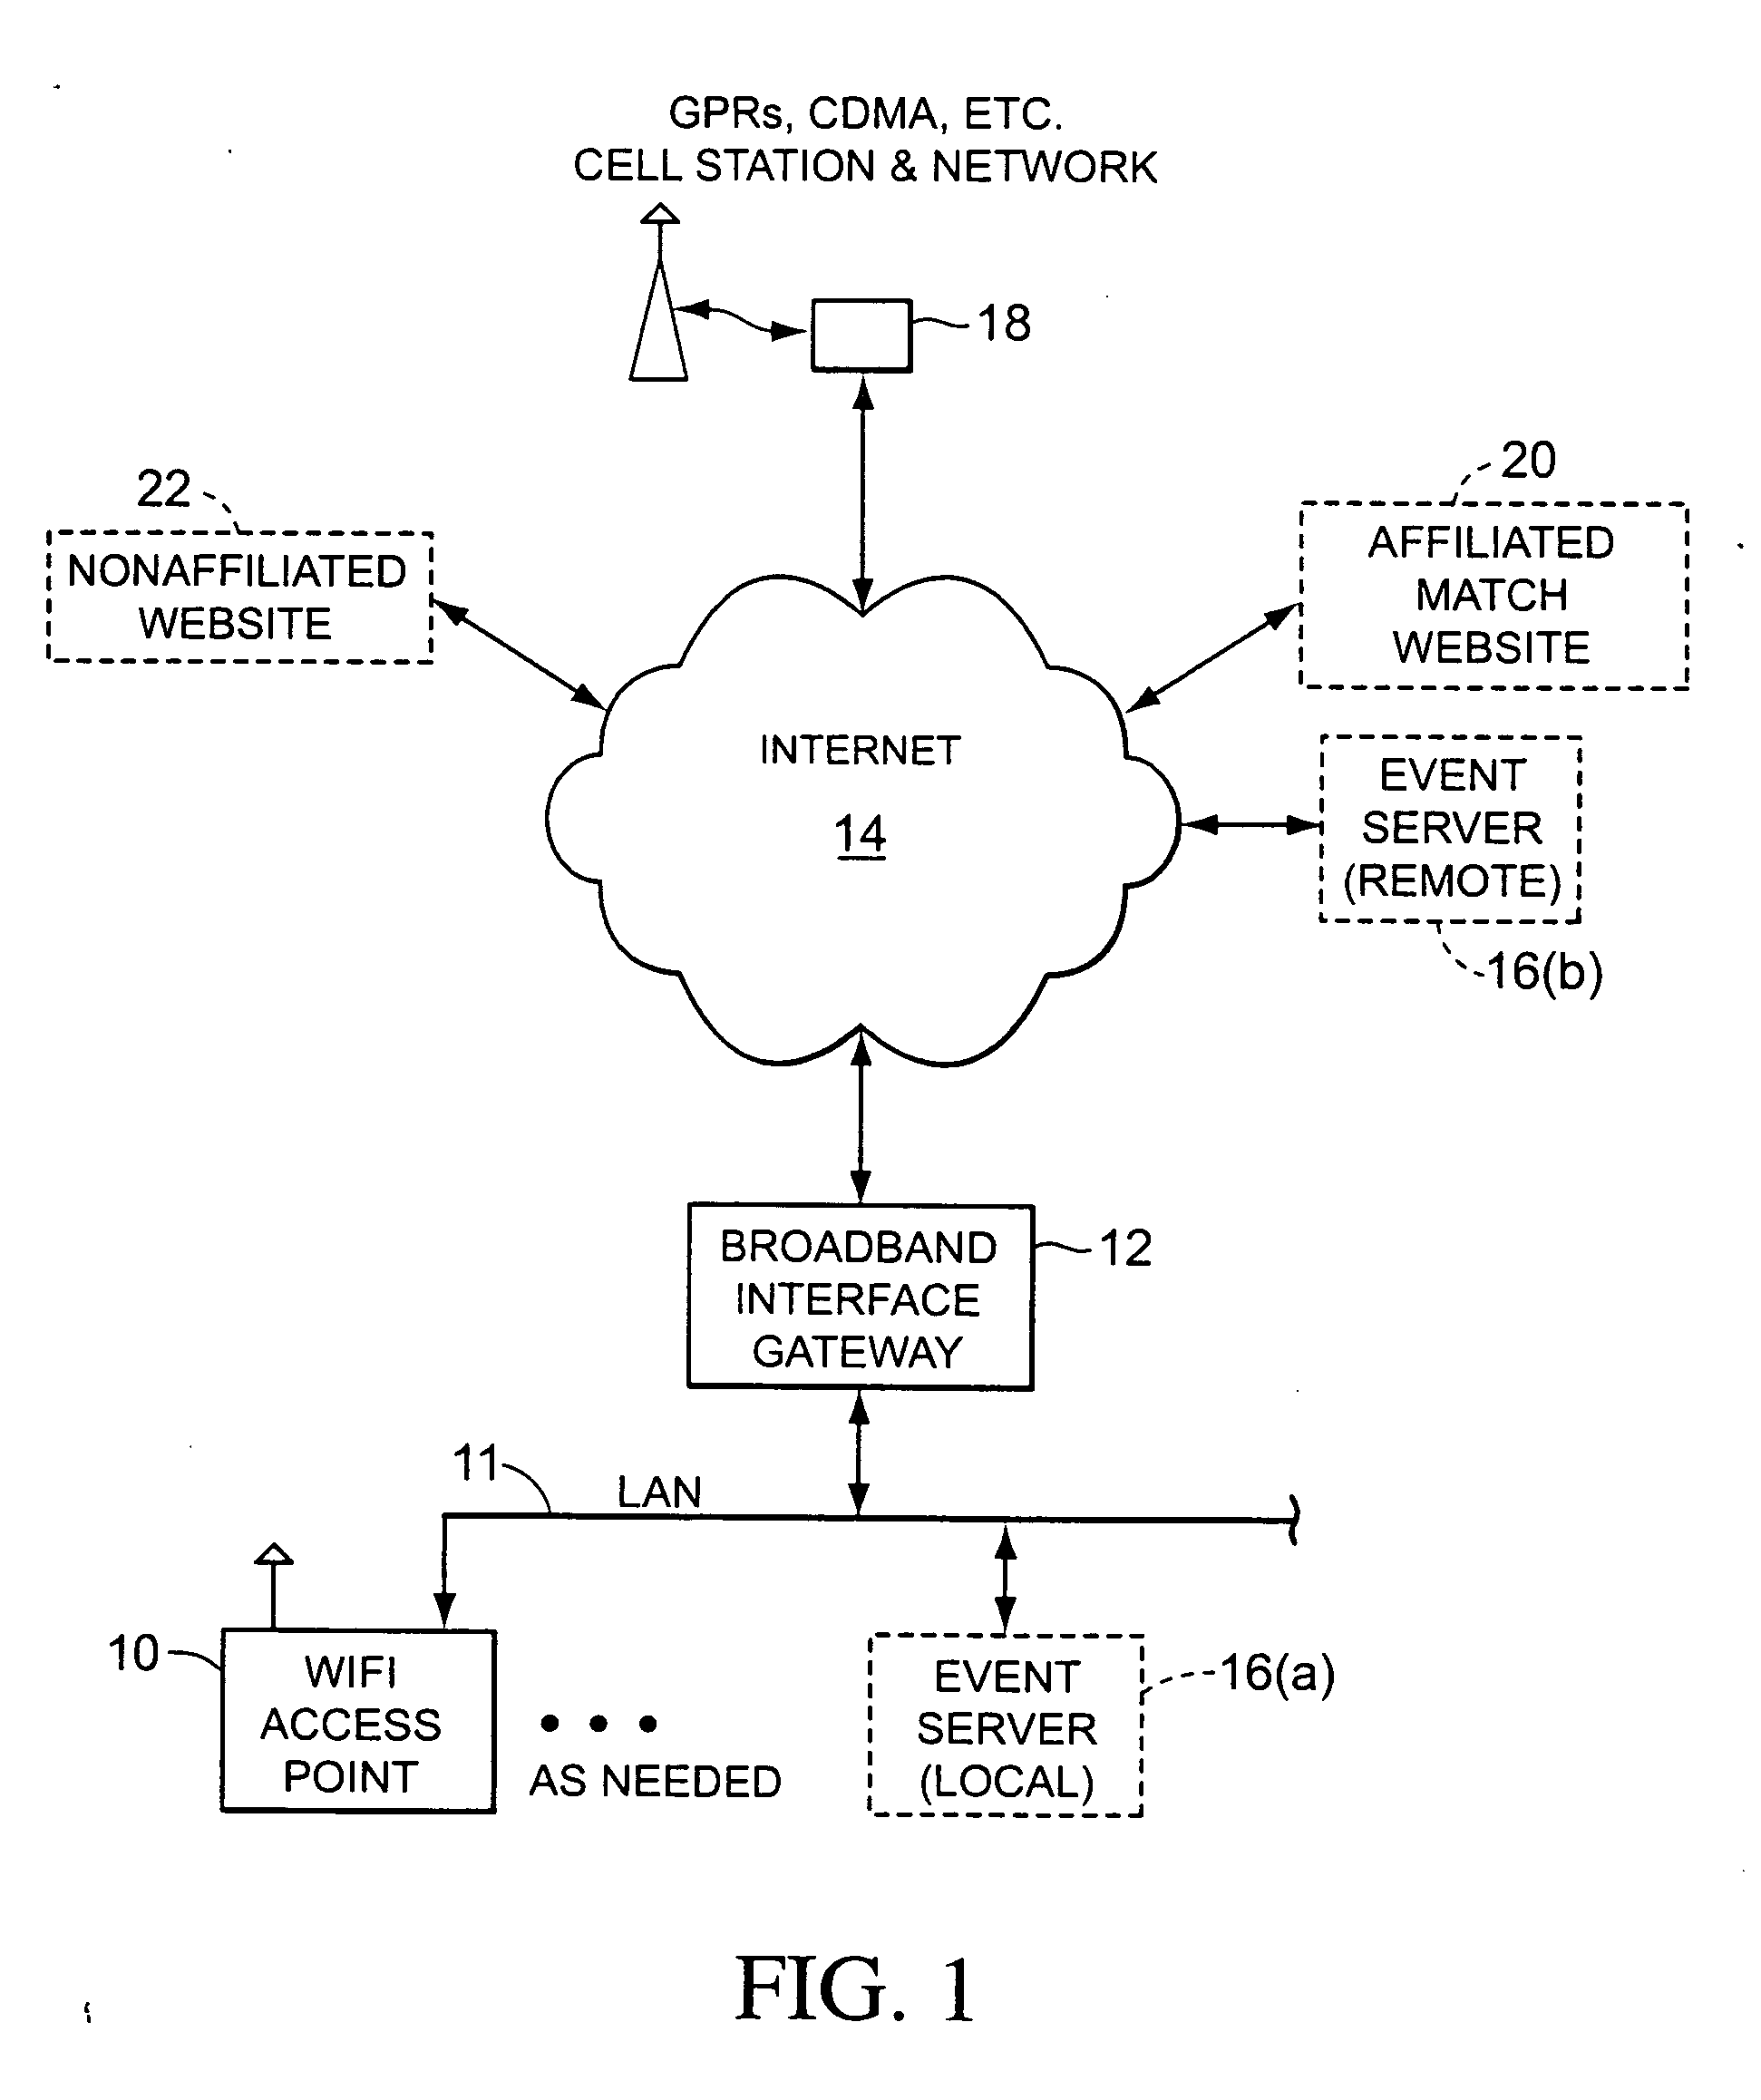 Realtime, interactive and geographically defined computerized personal matching systems and methods